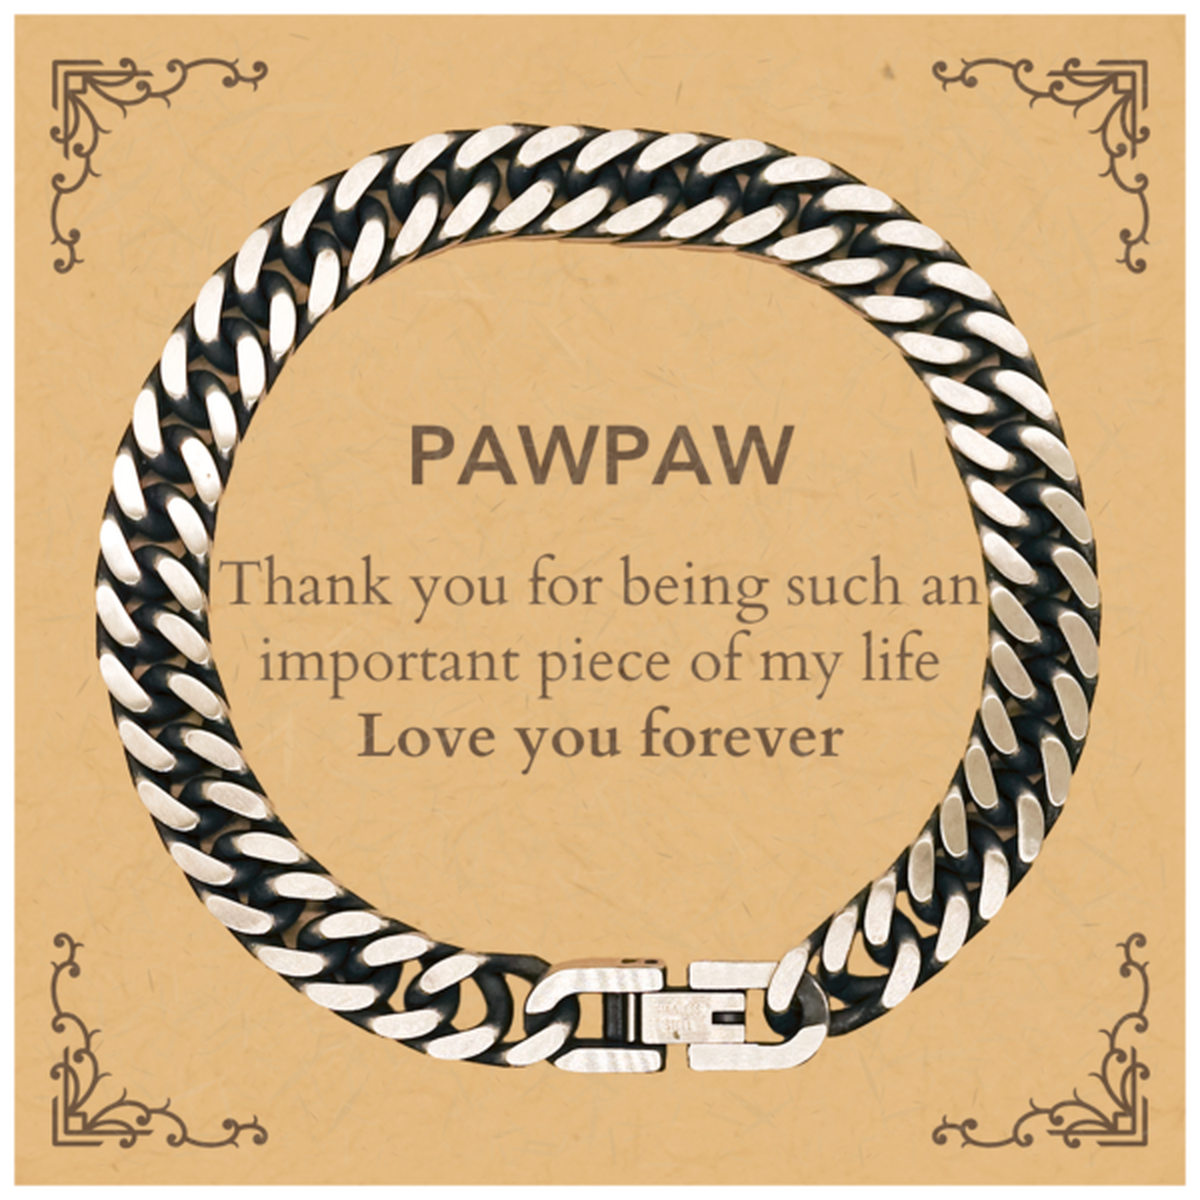 Appropriate Pawpaw Cuban Link Chain Bracelet Epic Birthday Gifts for Pawpaw Thank you for being such an important piece of my life Pawpaw Christmas Mothers Fathers Day